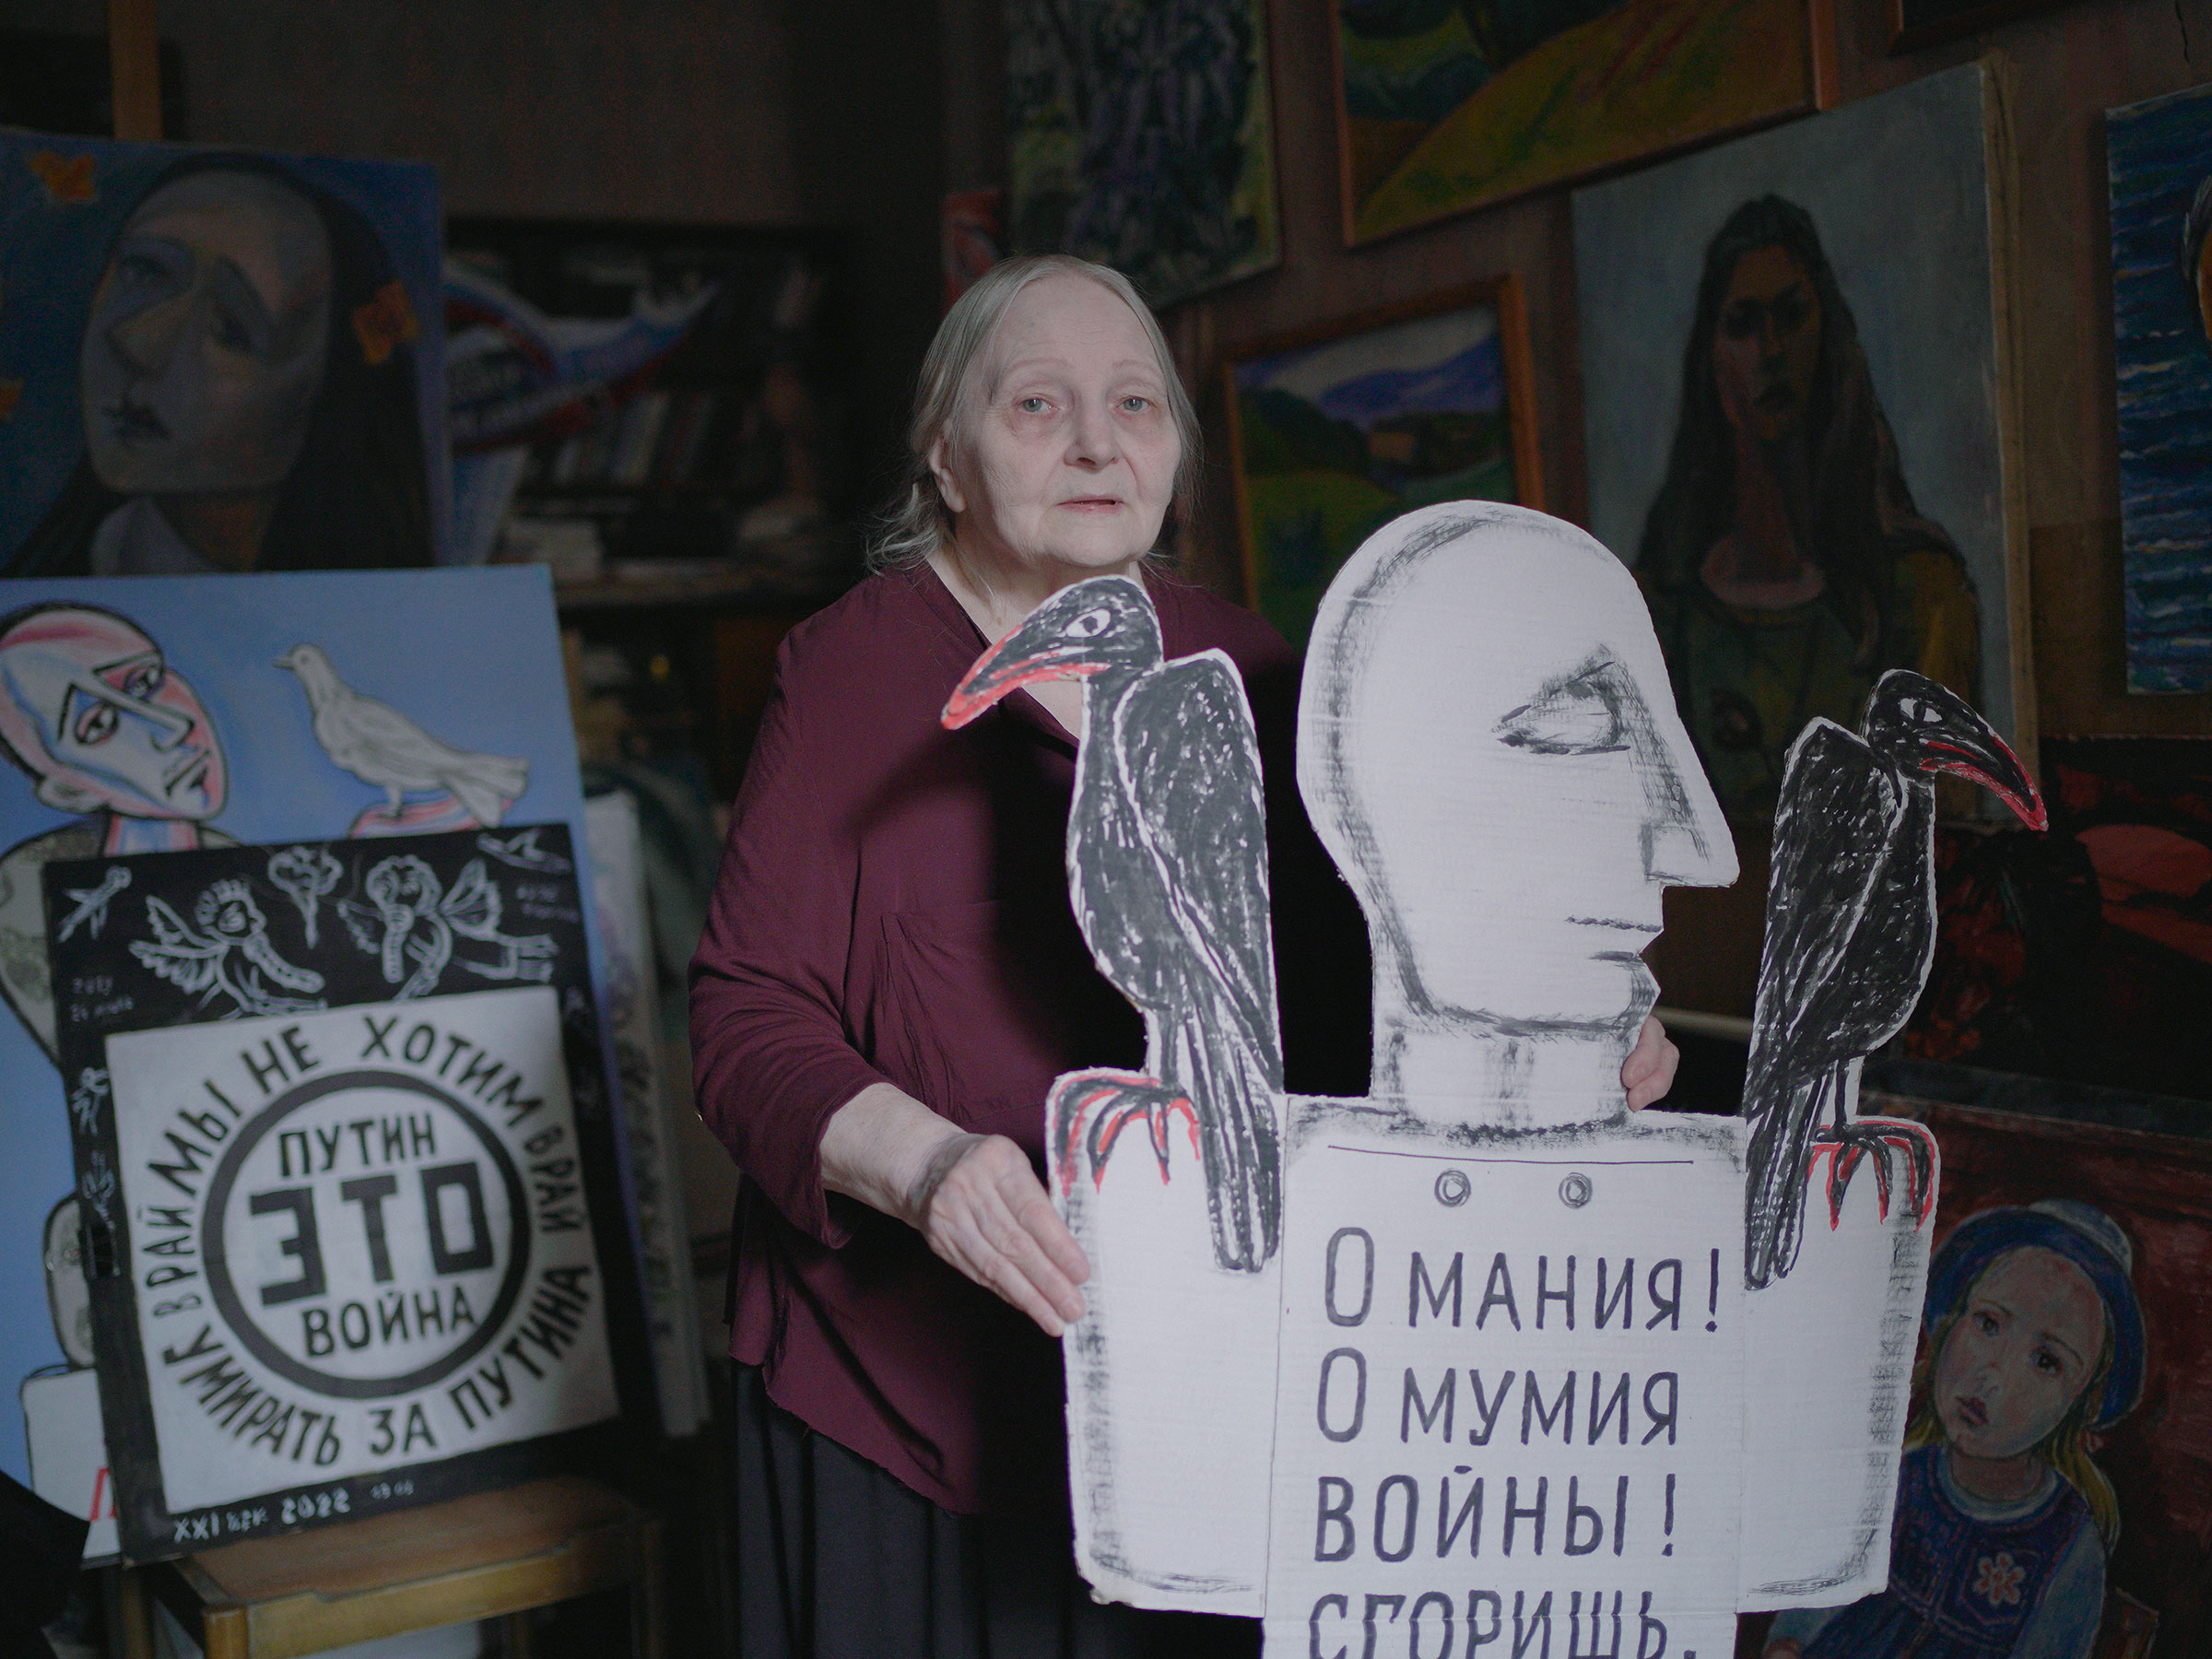 <b>Elena Osipova</b>, a 77-year-old artist known as the “conscience of St. Petersburg,” mounted her first protest in 2002. The day of the Ukraine invasion, a Moscow reporter phoned her for comment. “I said, ‘The Russian Führer comes to Anschluss.’” (Mary Gelman)